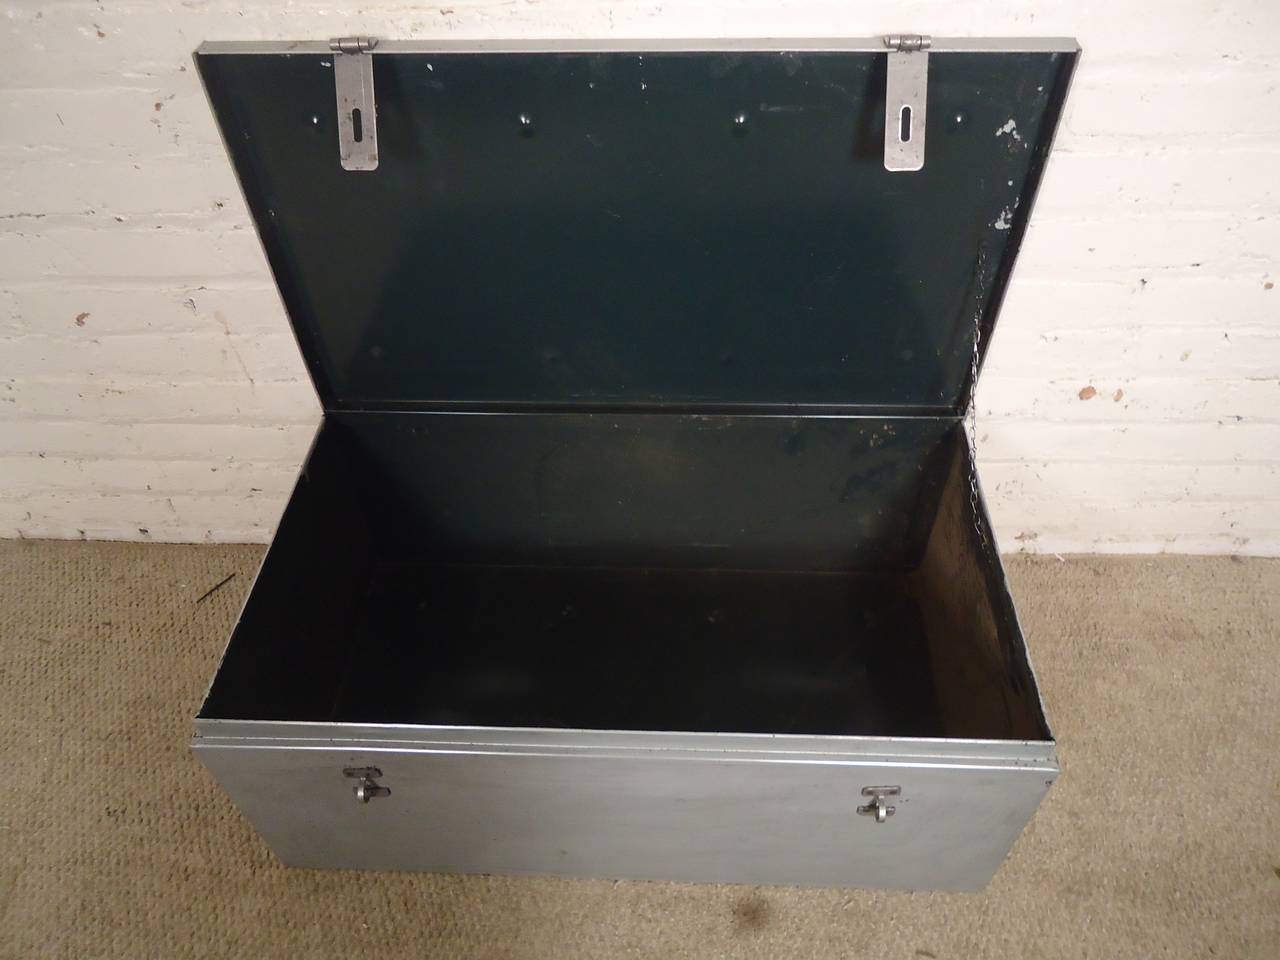 All metal equipment trunk with side handles. Great for storage. Has a rough industrial look.

(Please confirm item location - NY or NJ - with dealer)